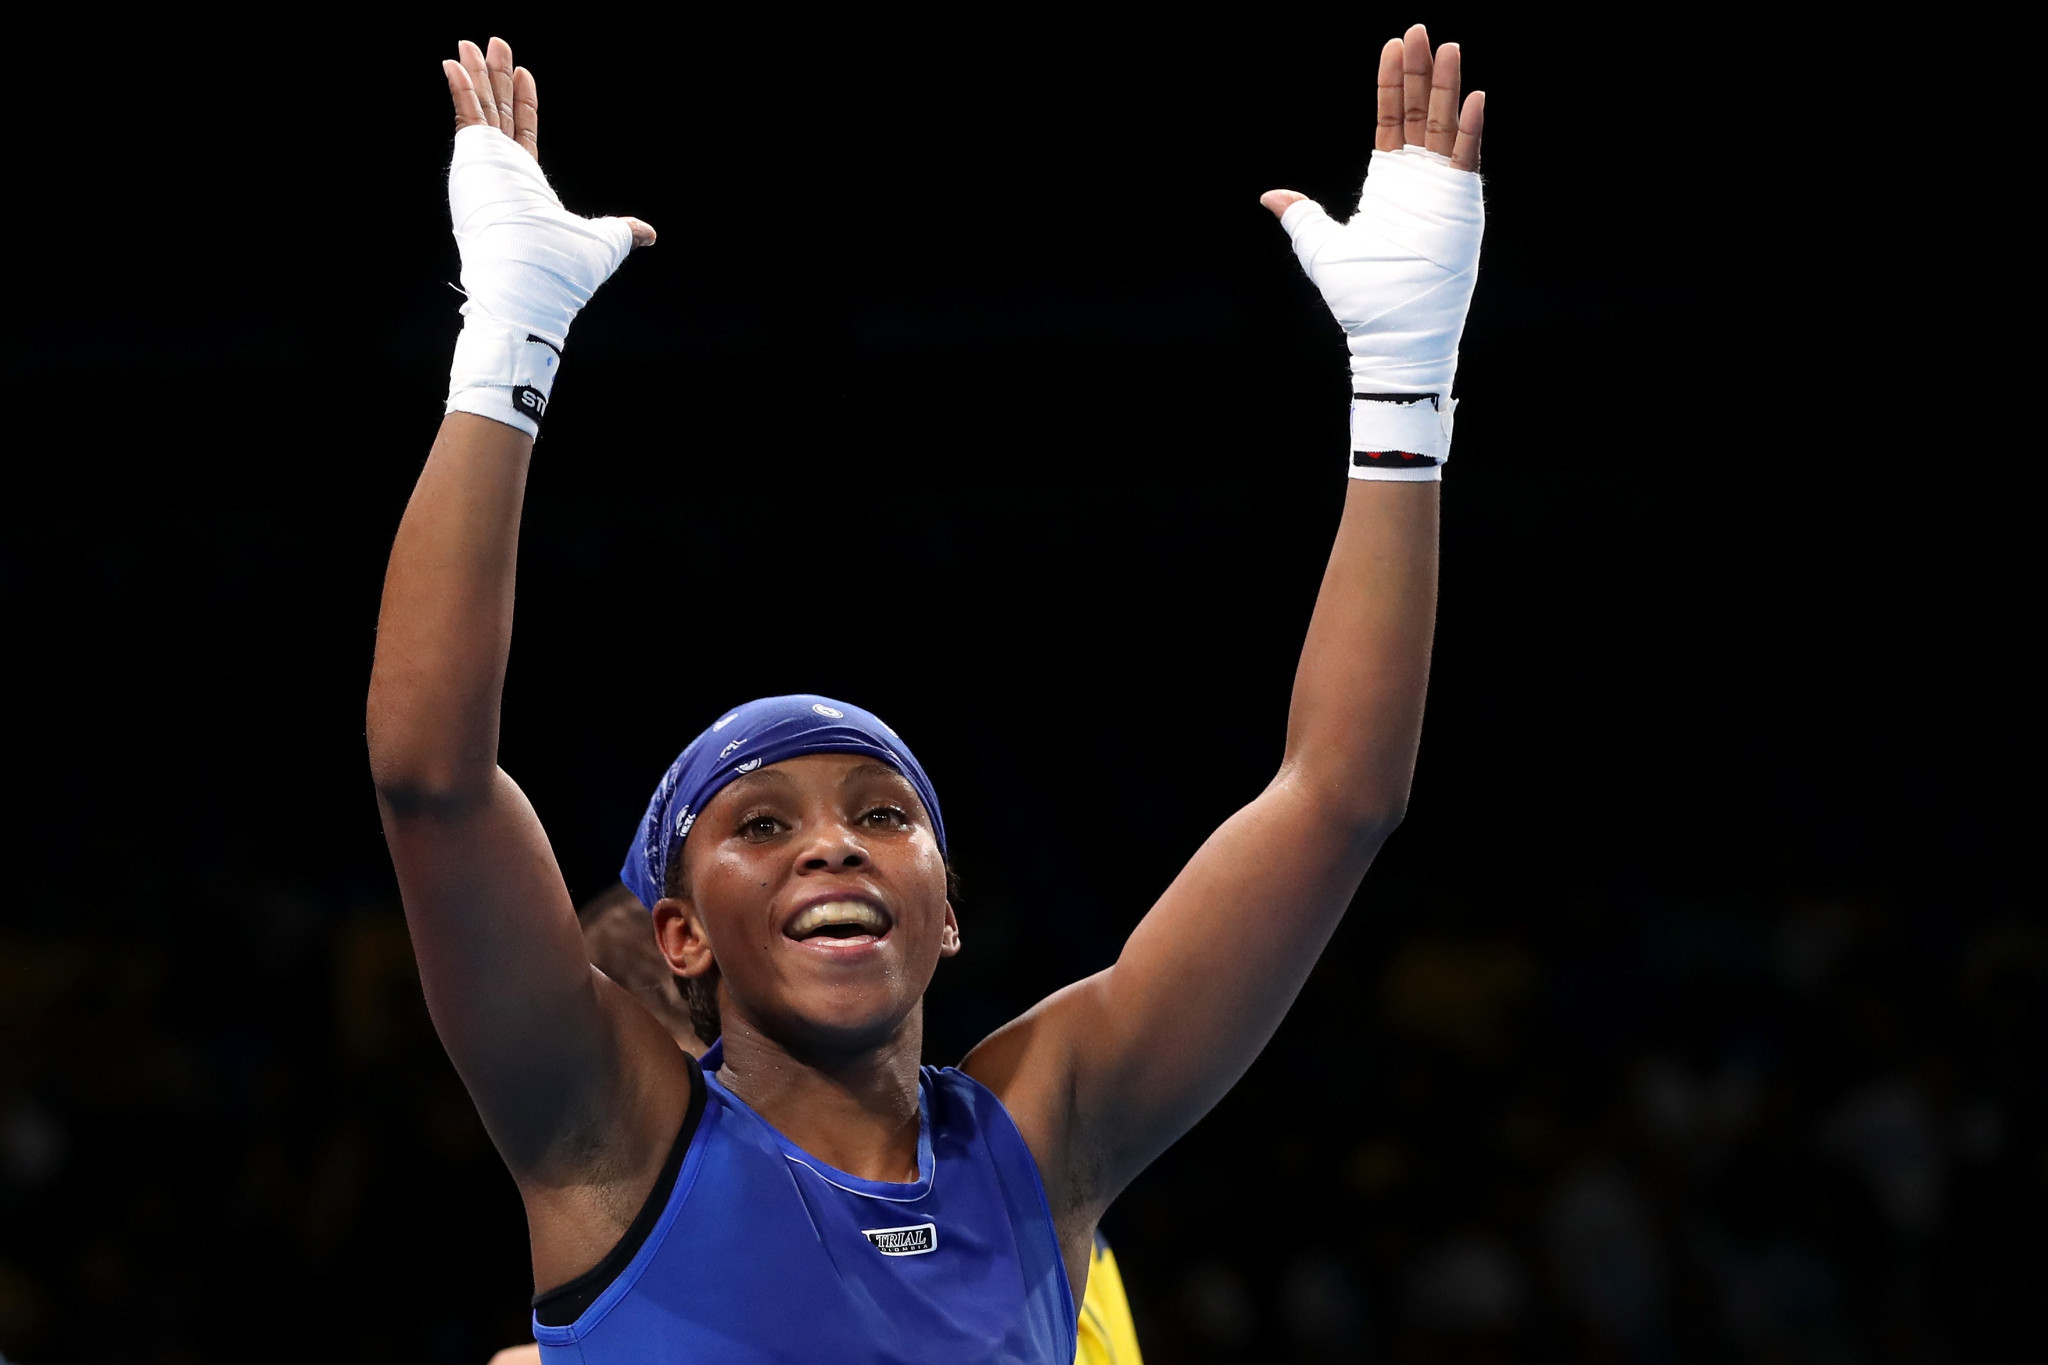 Olympic bronze medallist wins opening bout at AIBA Women's World Boxing Championships in New Delhi